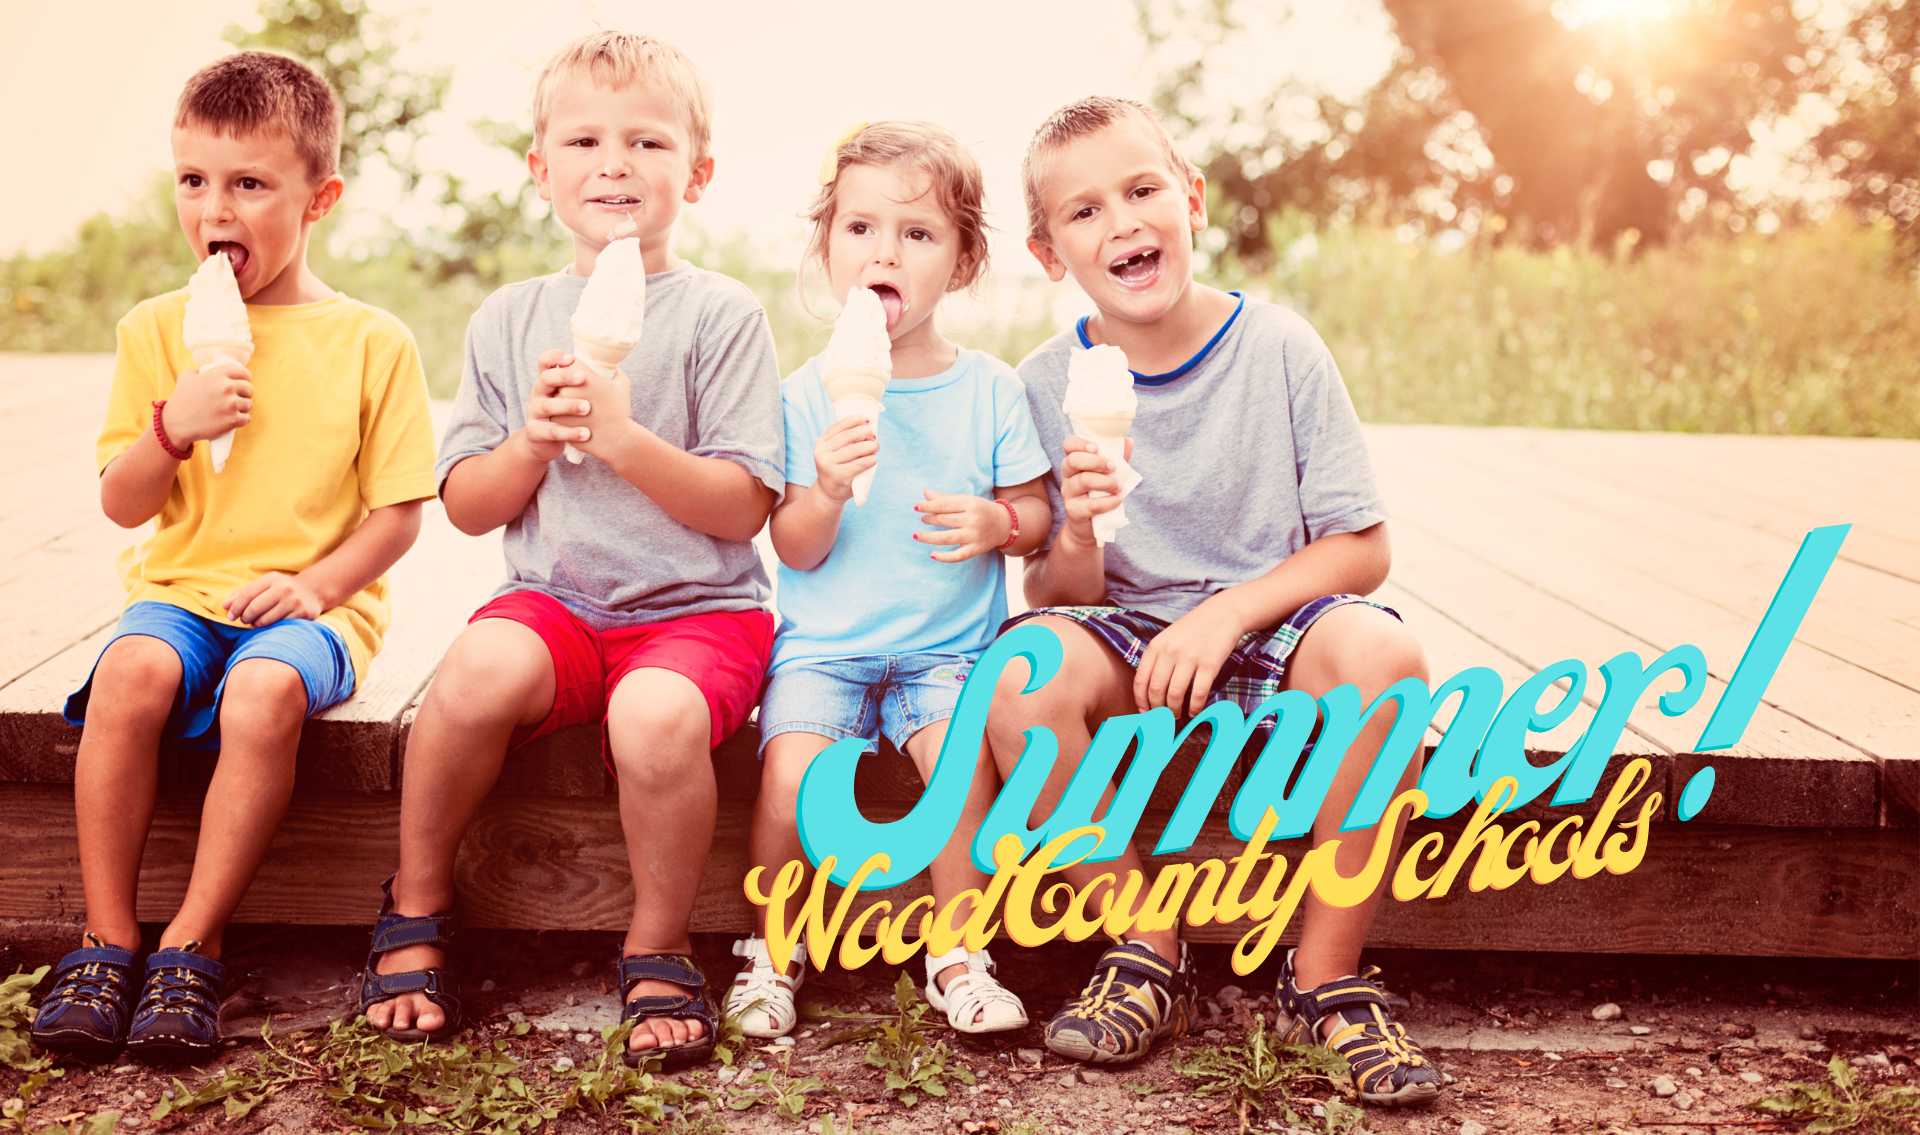 summer! - wood county schools - image of four young children with ice cream cones